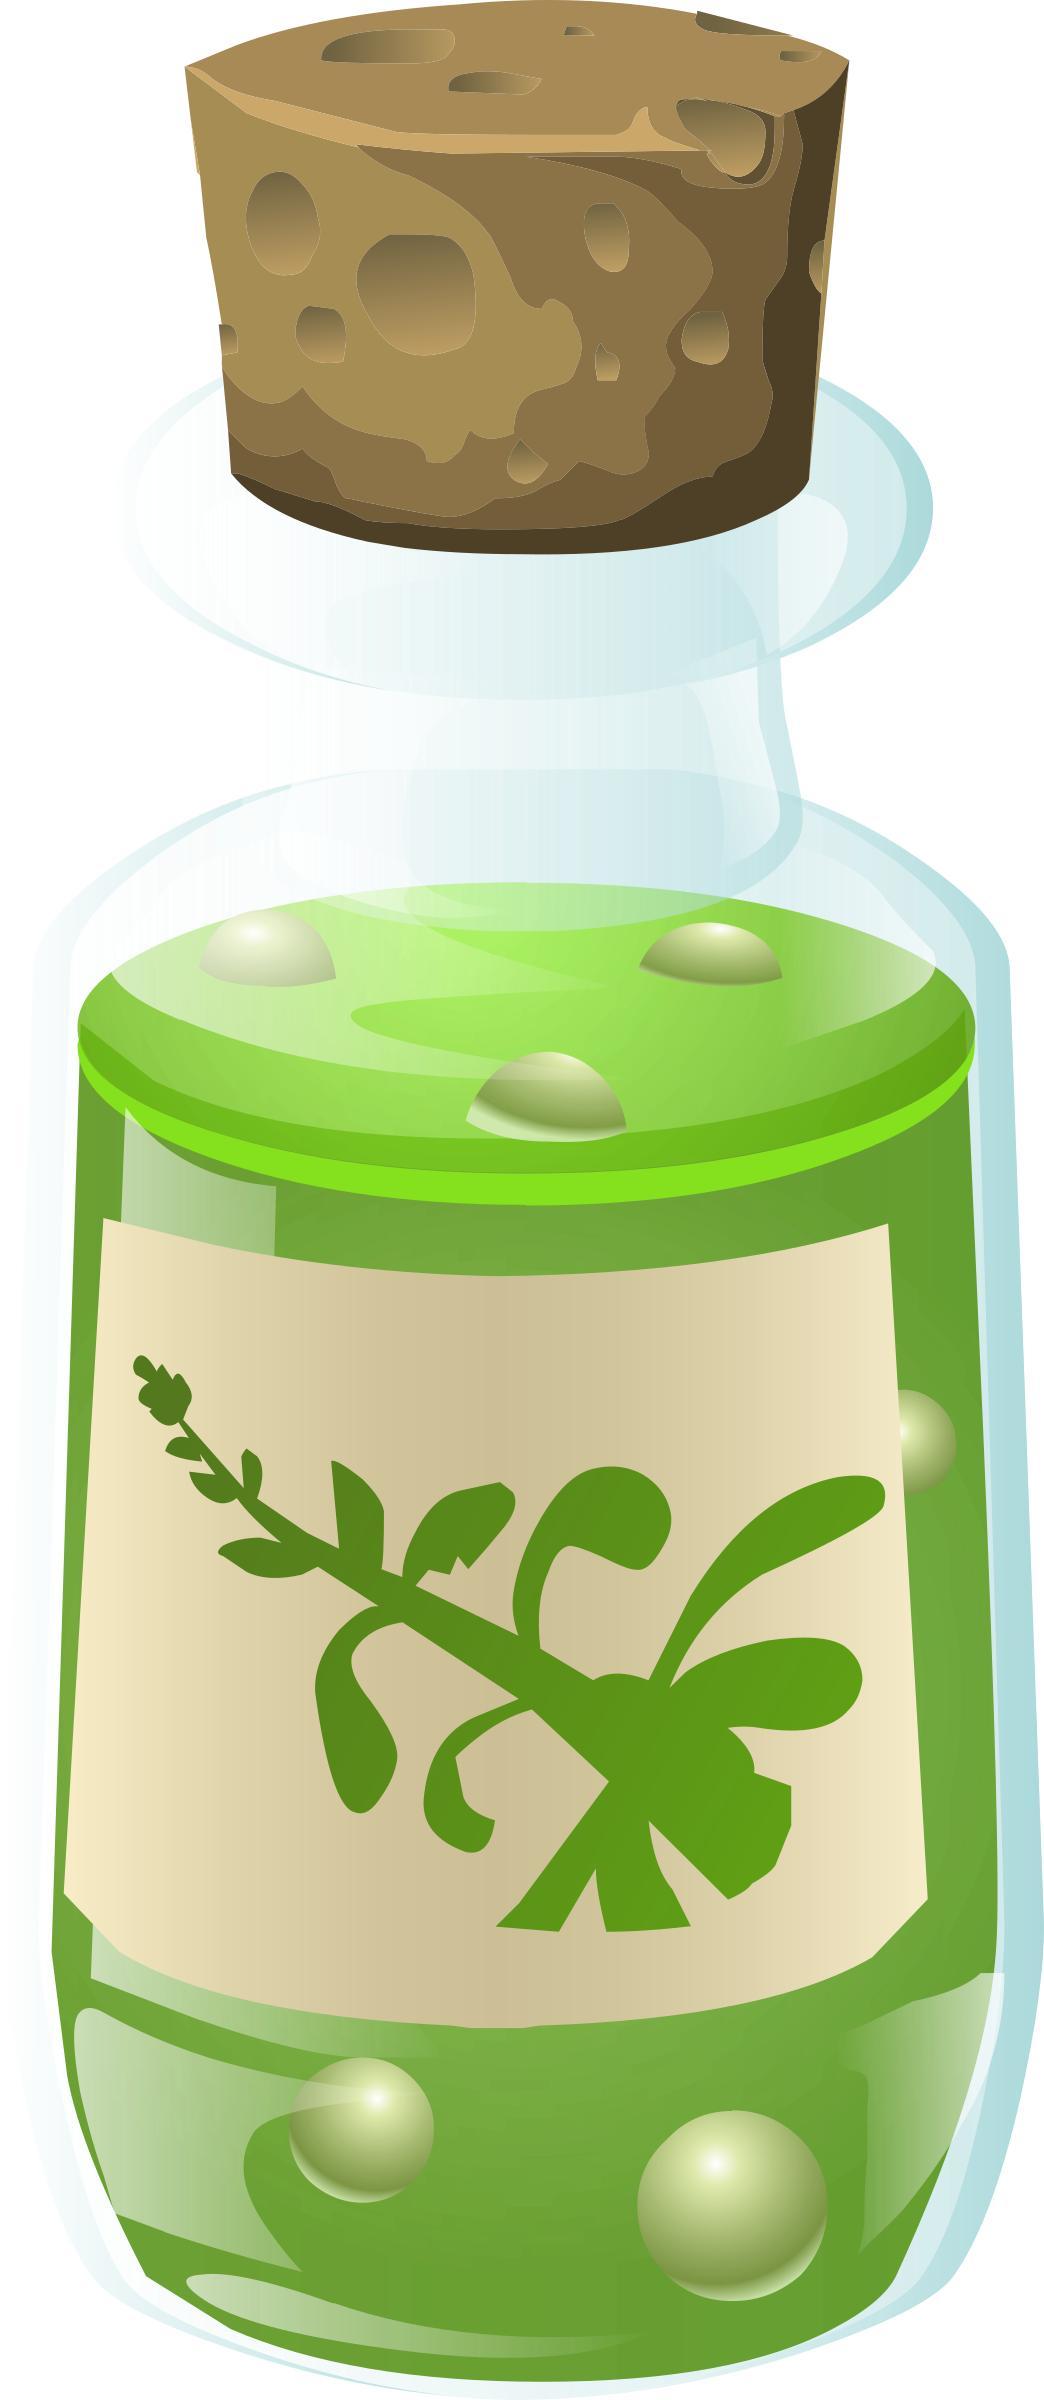 Alchemy Essence Of Rubeweed png transparent